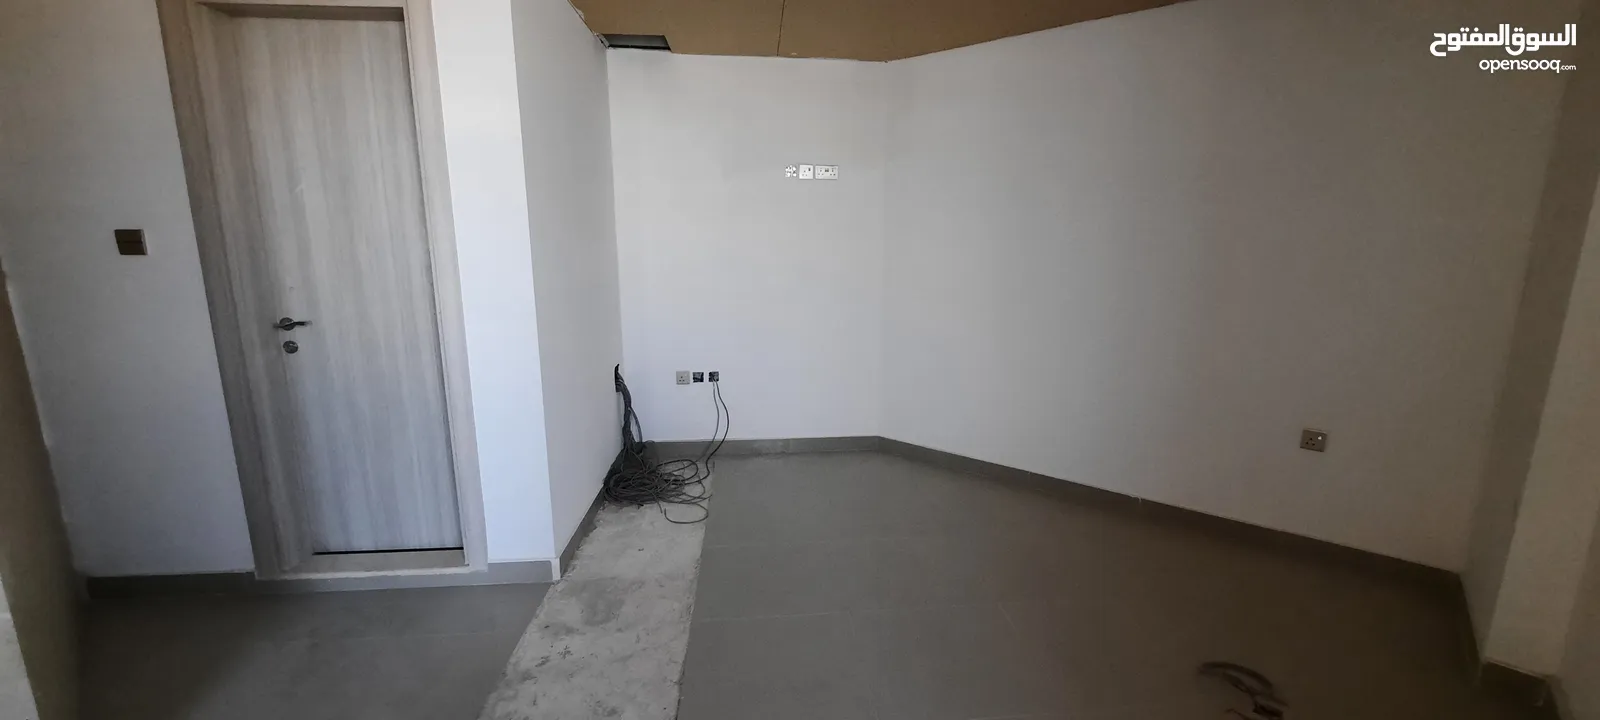 107 Square Meter Partitioned Office for Rent - Muhalab Towers near Express